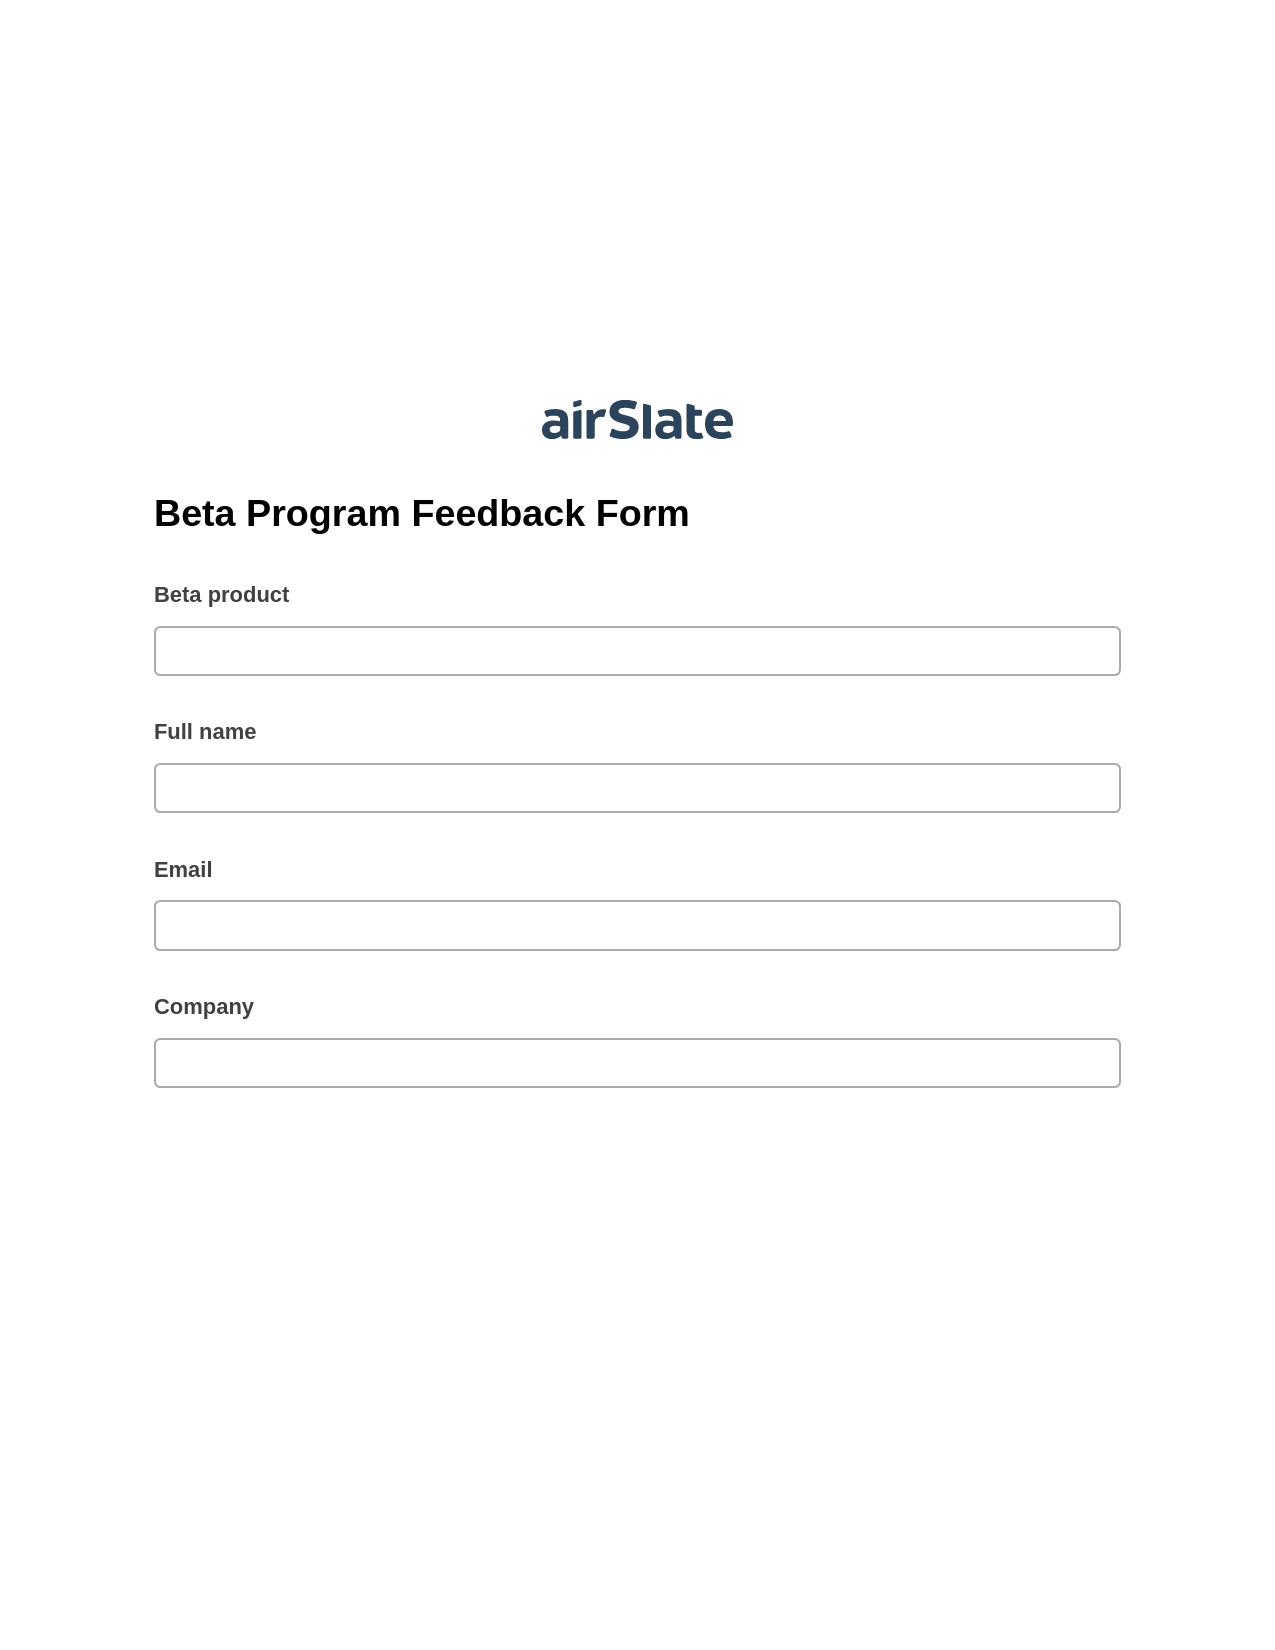 Beta Program Feedback Form Pre-fill from another Slate Bot, Update Salesforce Record Bot, Archive to SharePoint Folder Bot